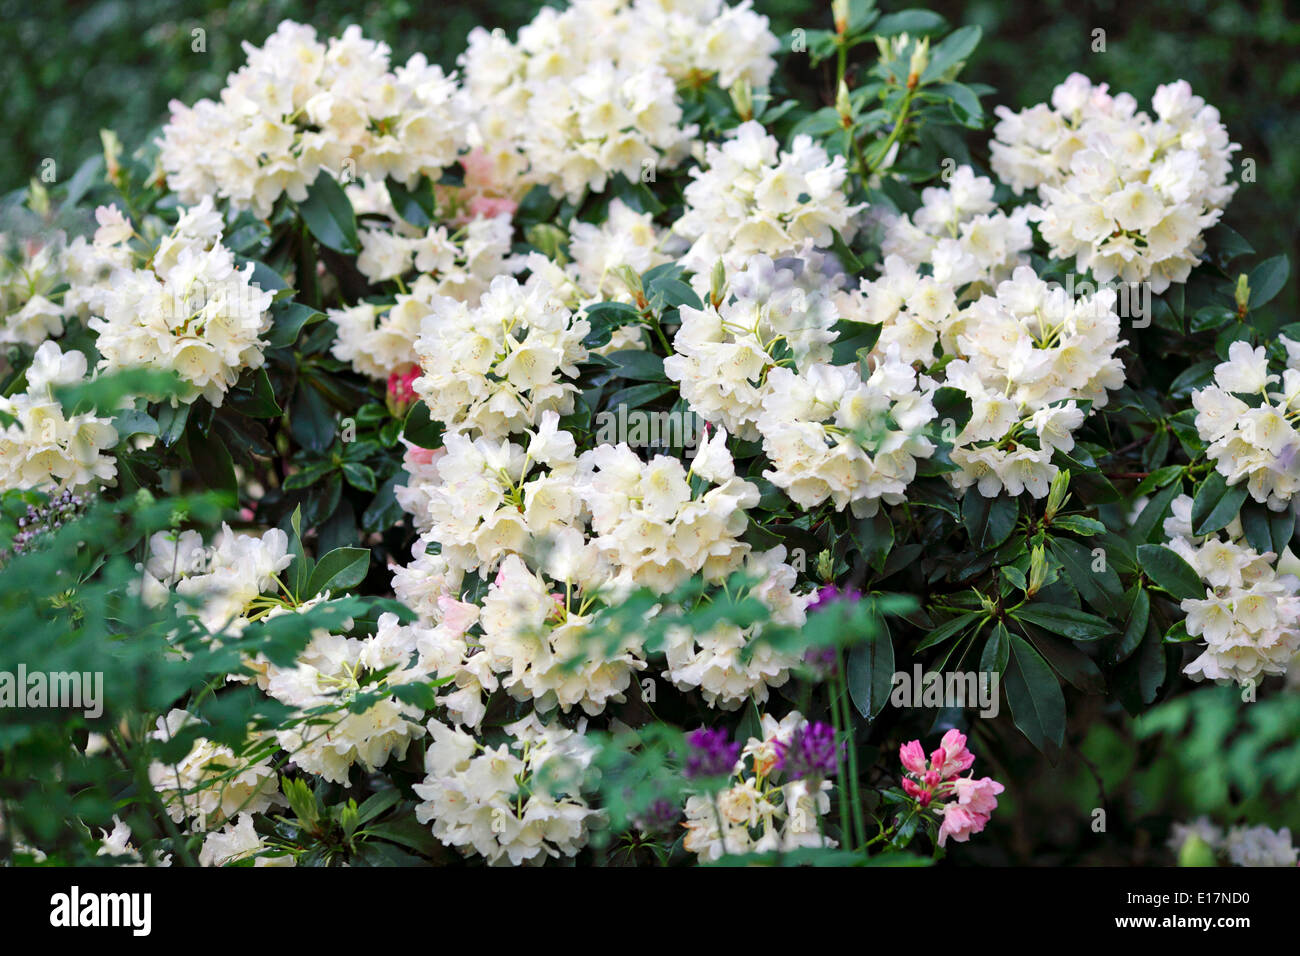 Spring display of creamy white Rhododendron blooms bathed in natural sunlight seen here in an English country garden. Stock Photo